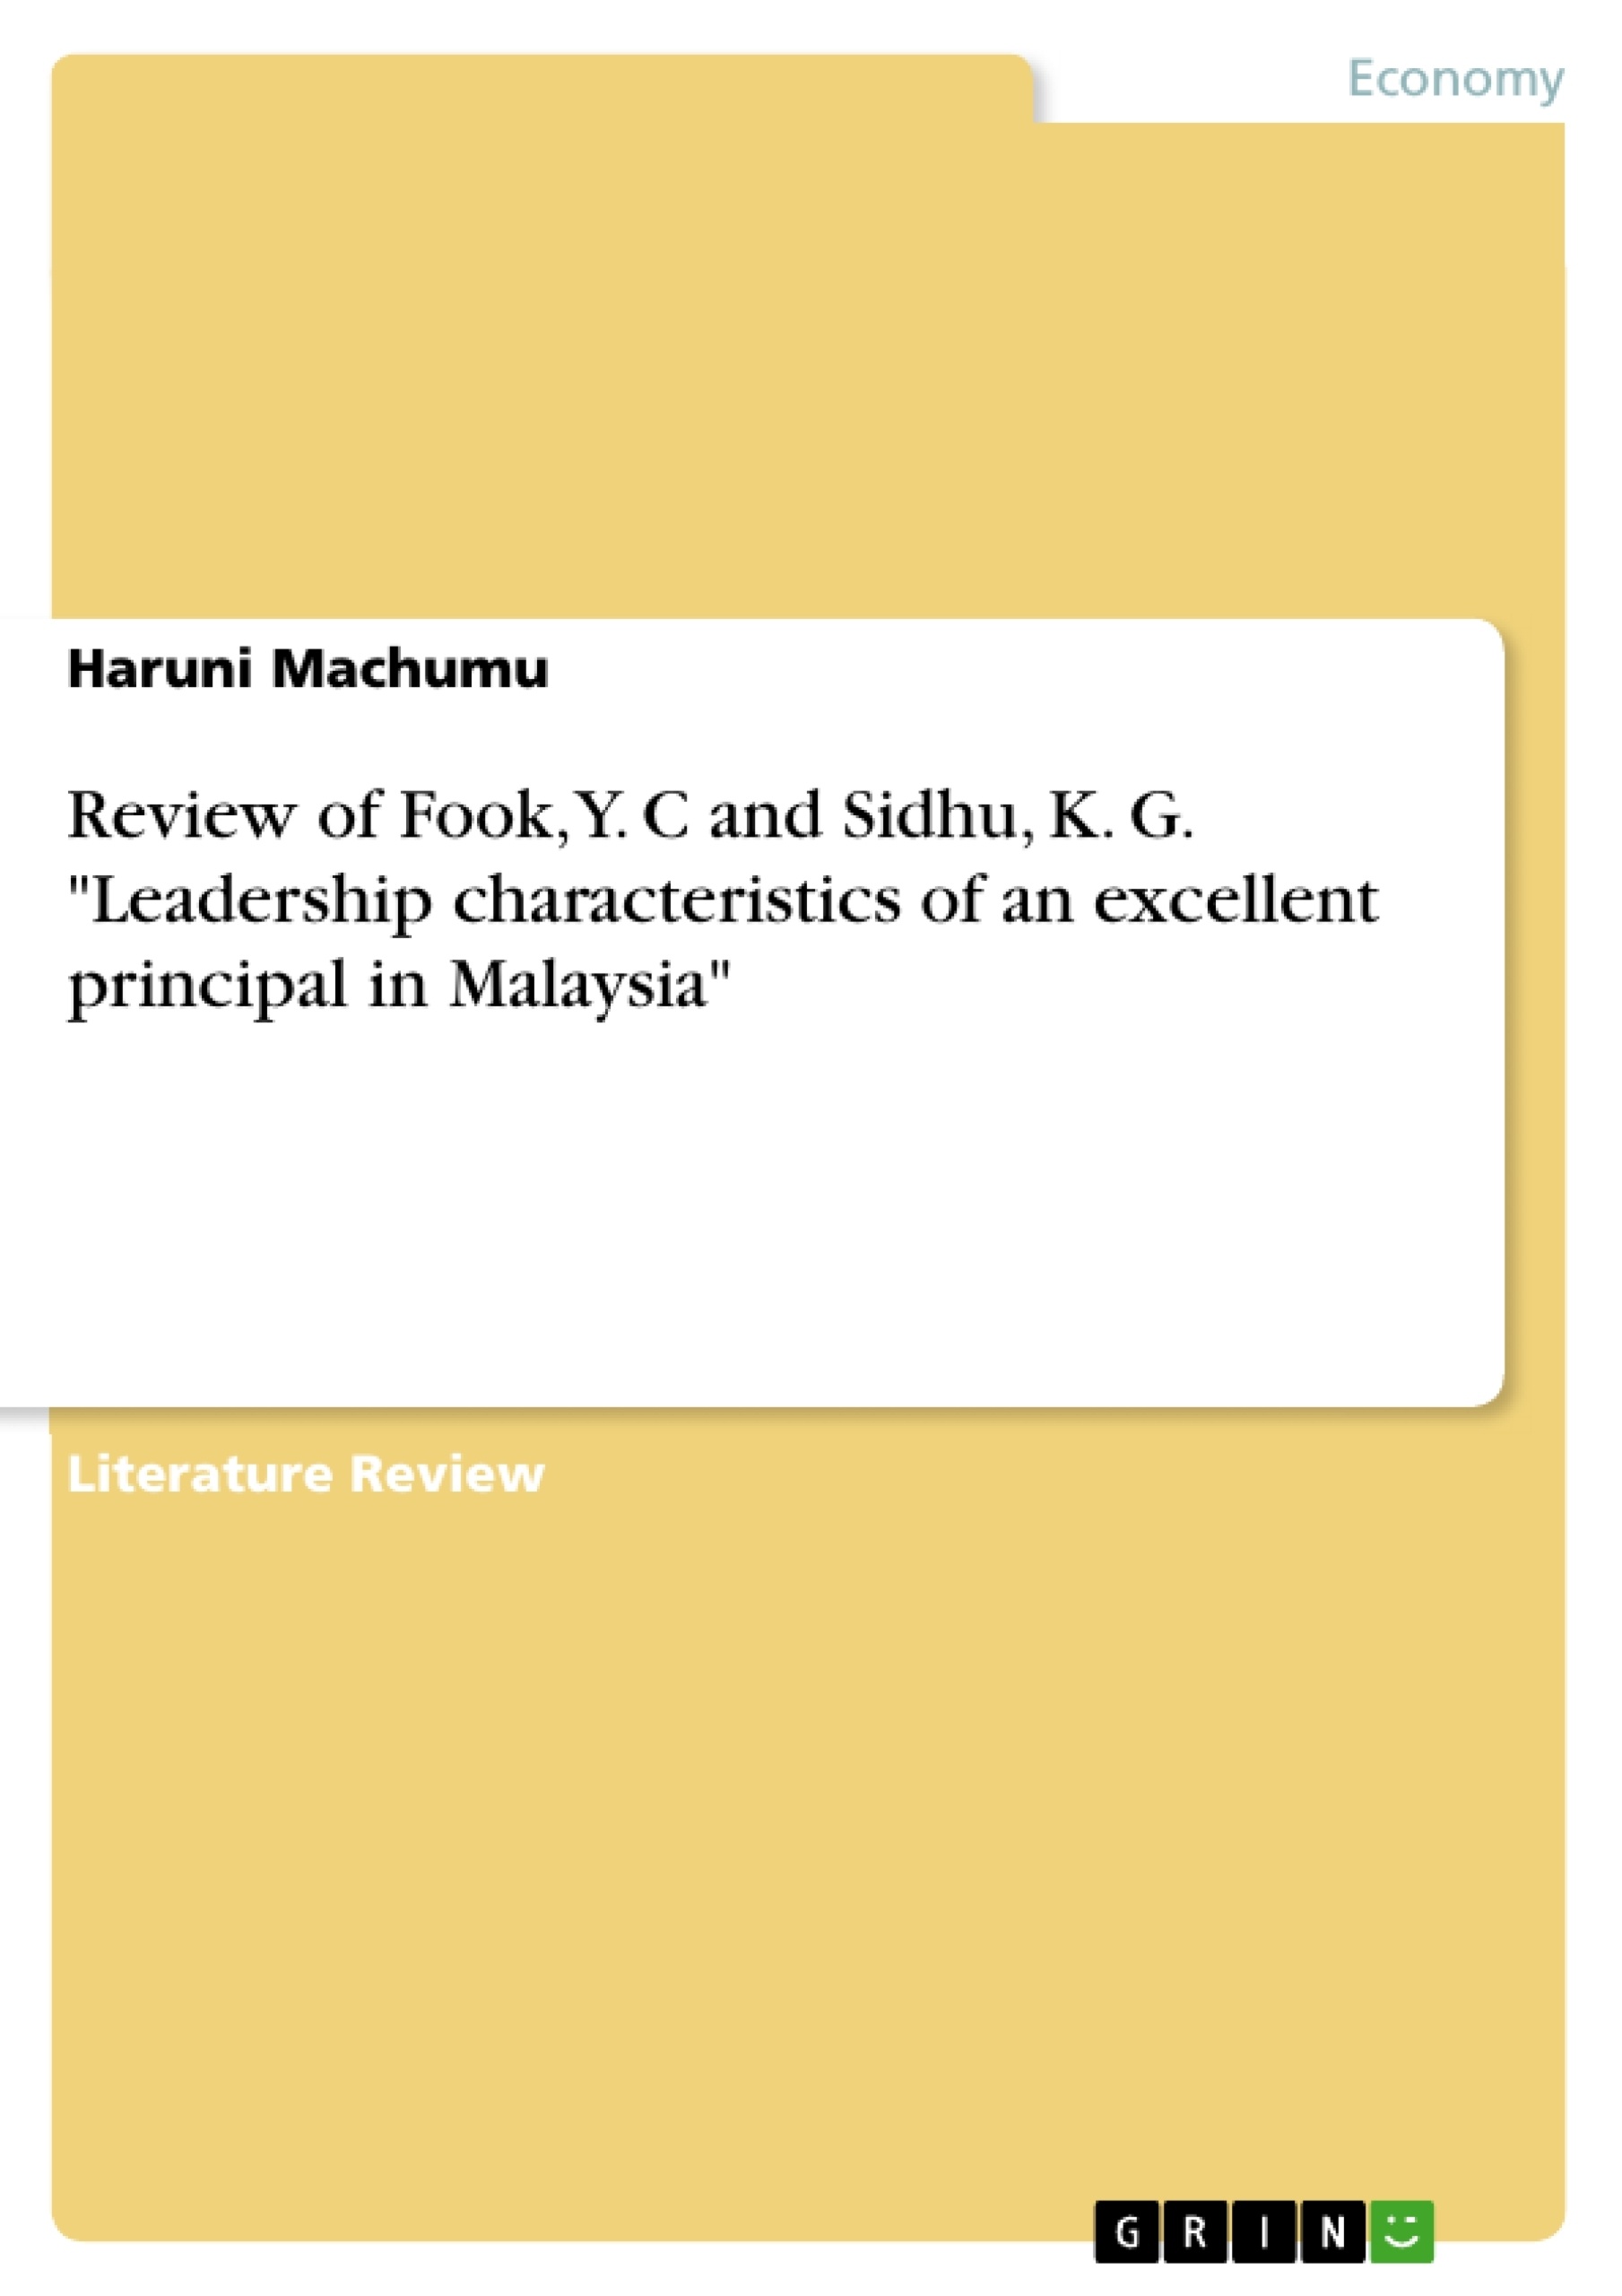 Titel: Review of Fook, Y. C and Sidhu, K. G. "Leadership characteristics of an excellent principal in  Malaysia"